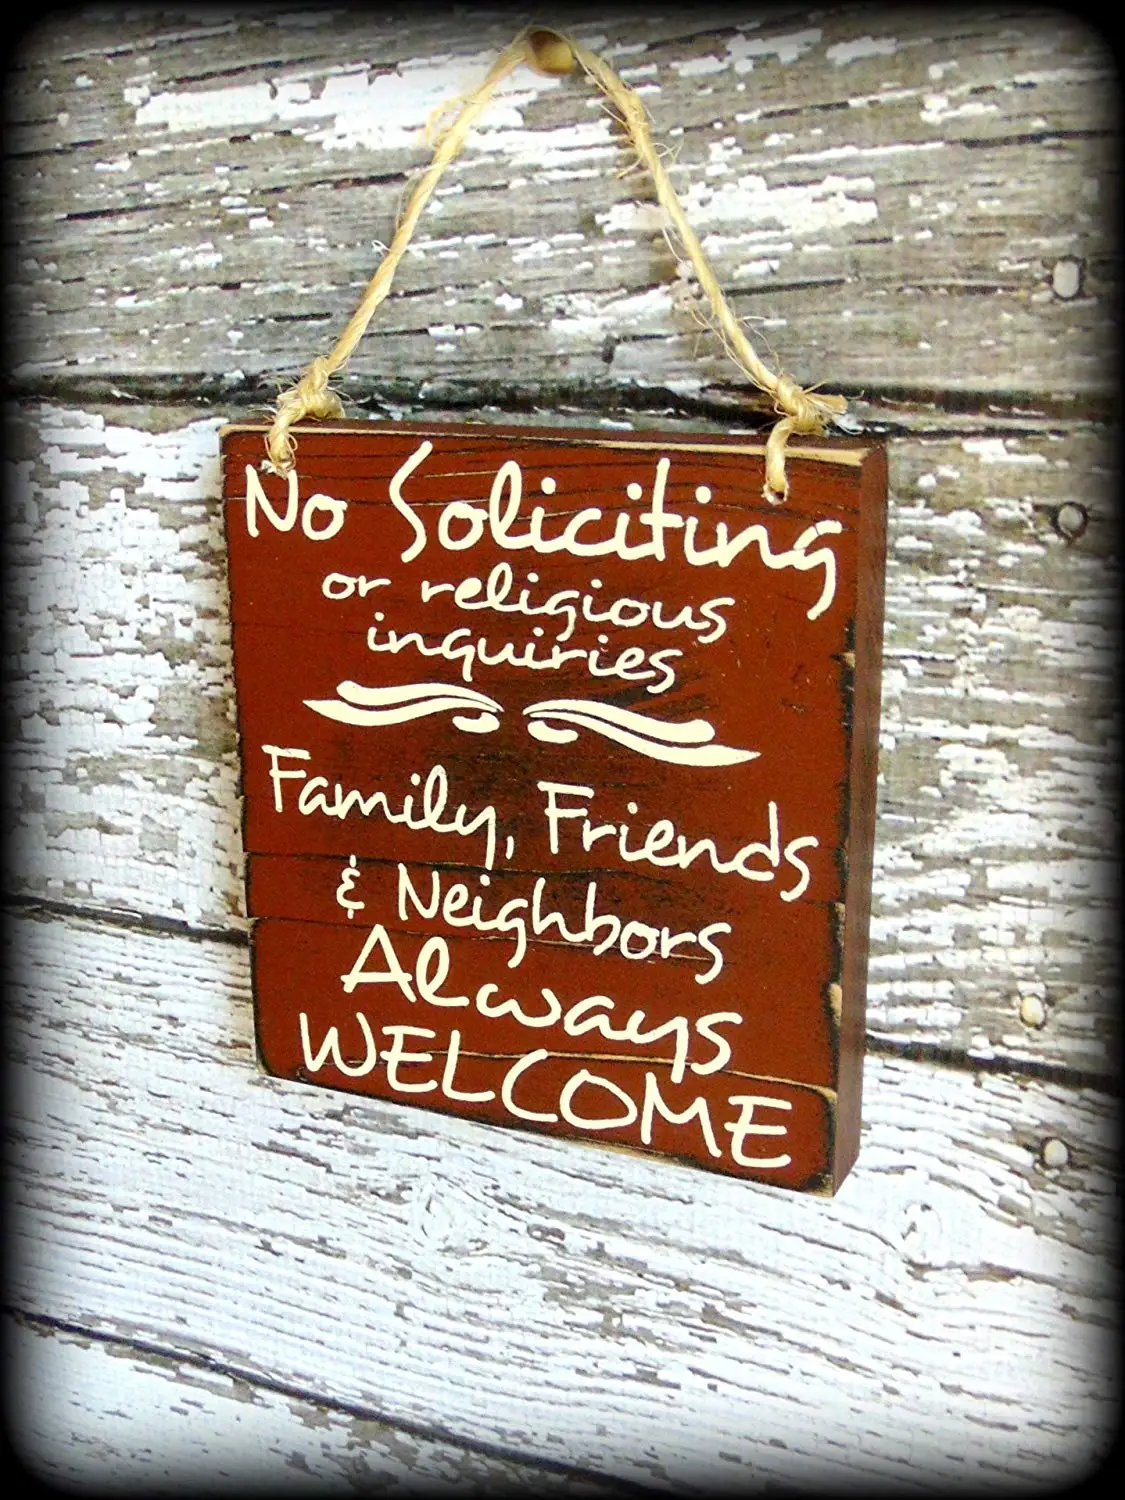 cheap printable no soliciting door sign find printable no soliciting